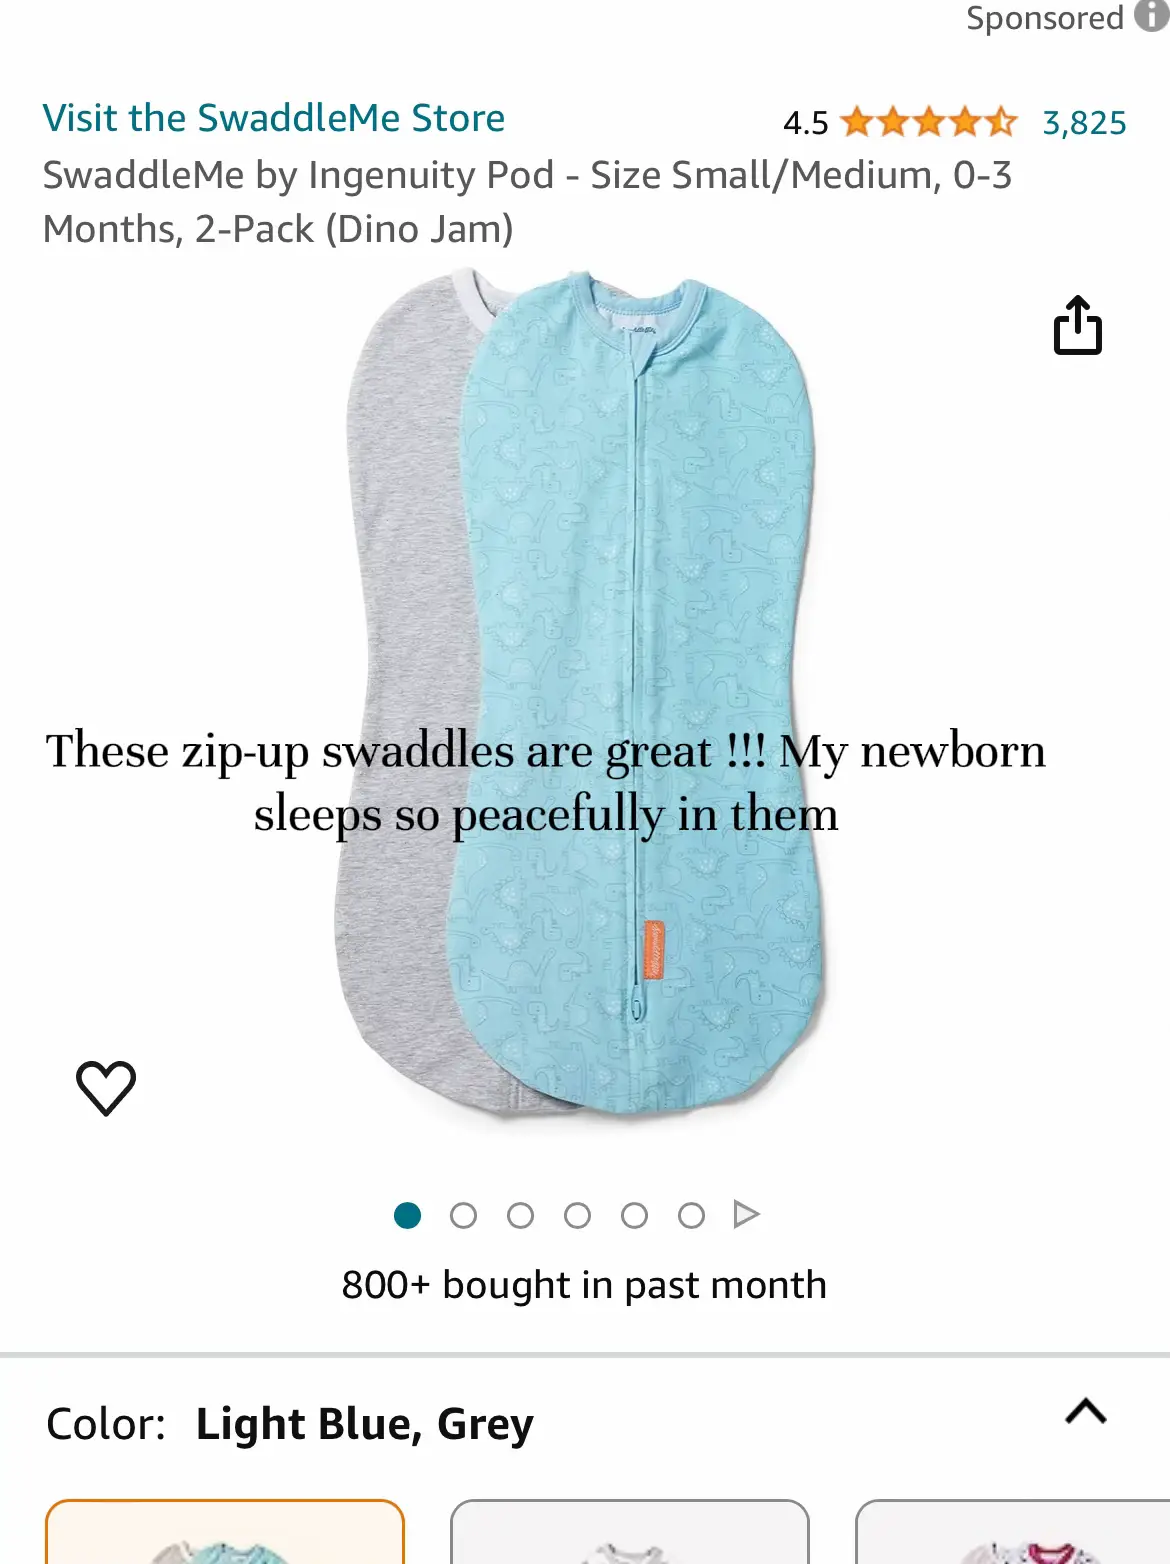 Baby Shower Gift Ideas for First-Time Moms - Lemon8 Search